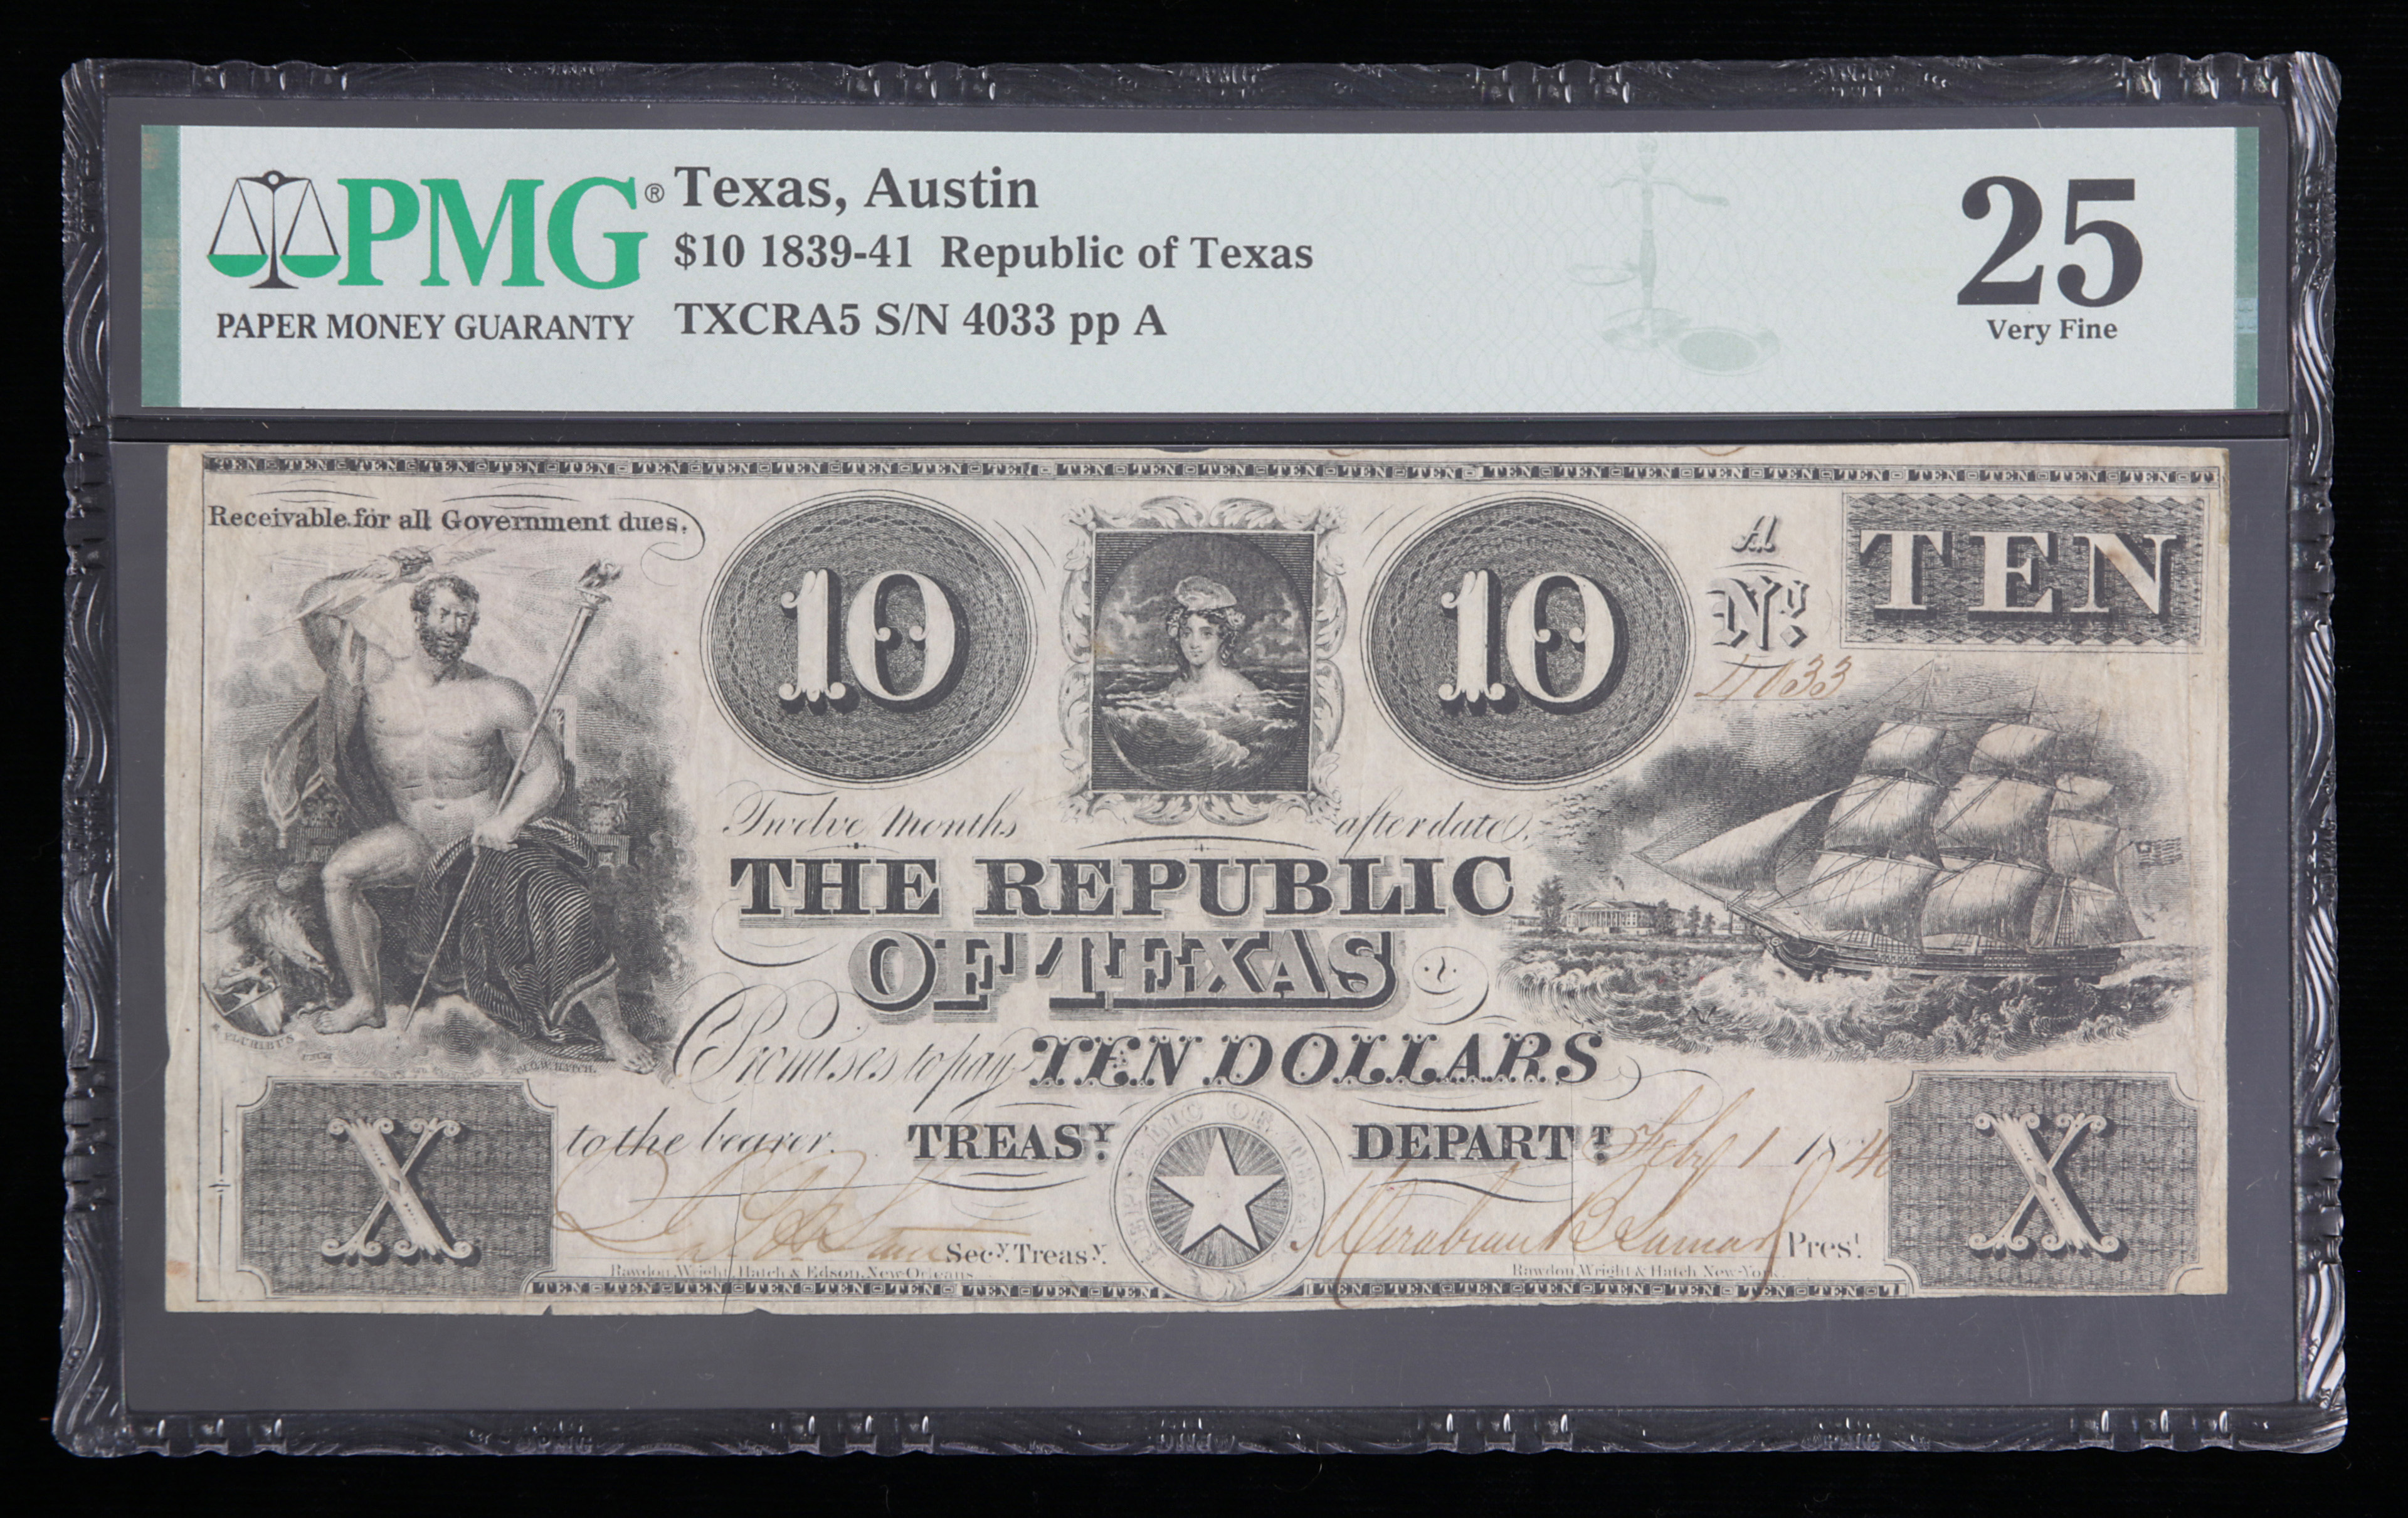 $10 CURRENCY 1839-41 REPUBLIC OF